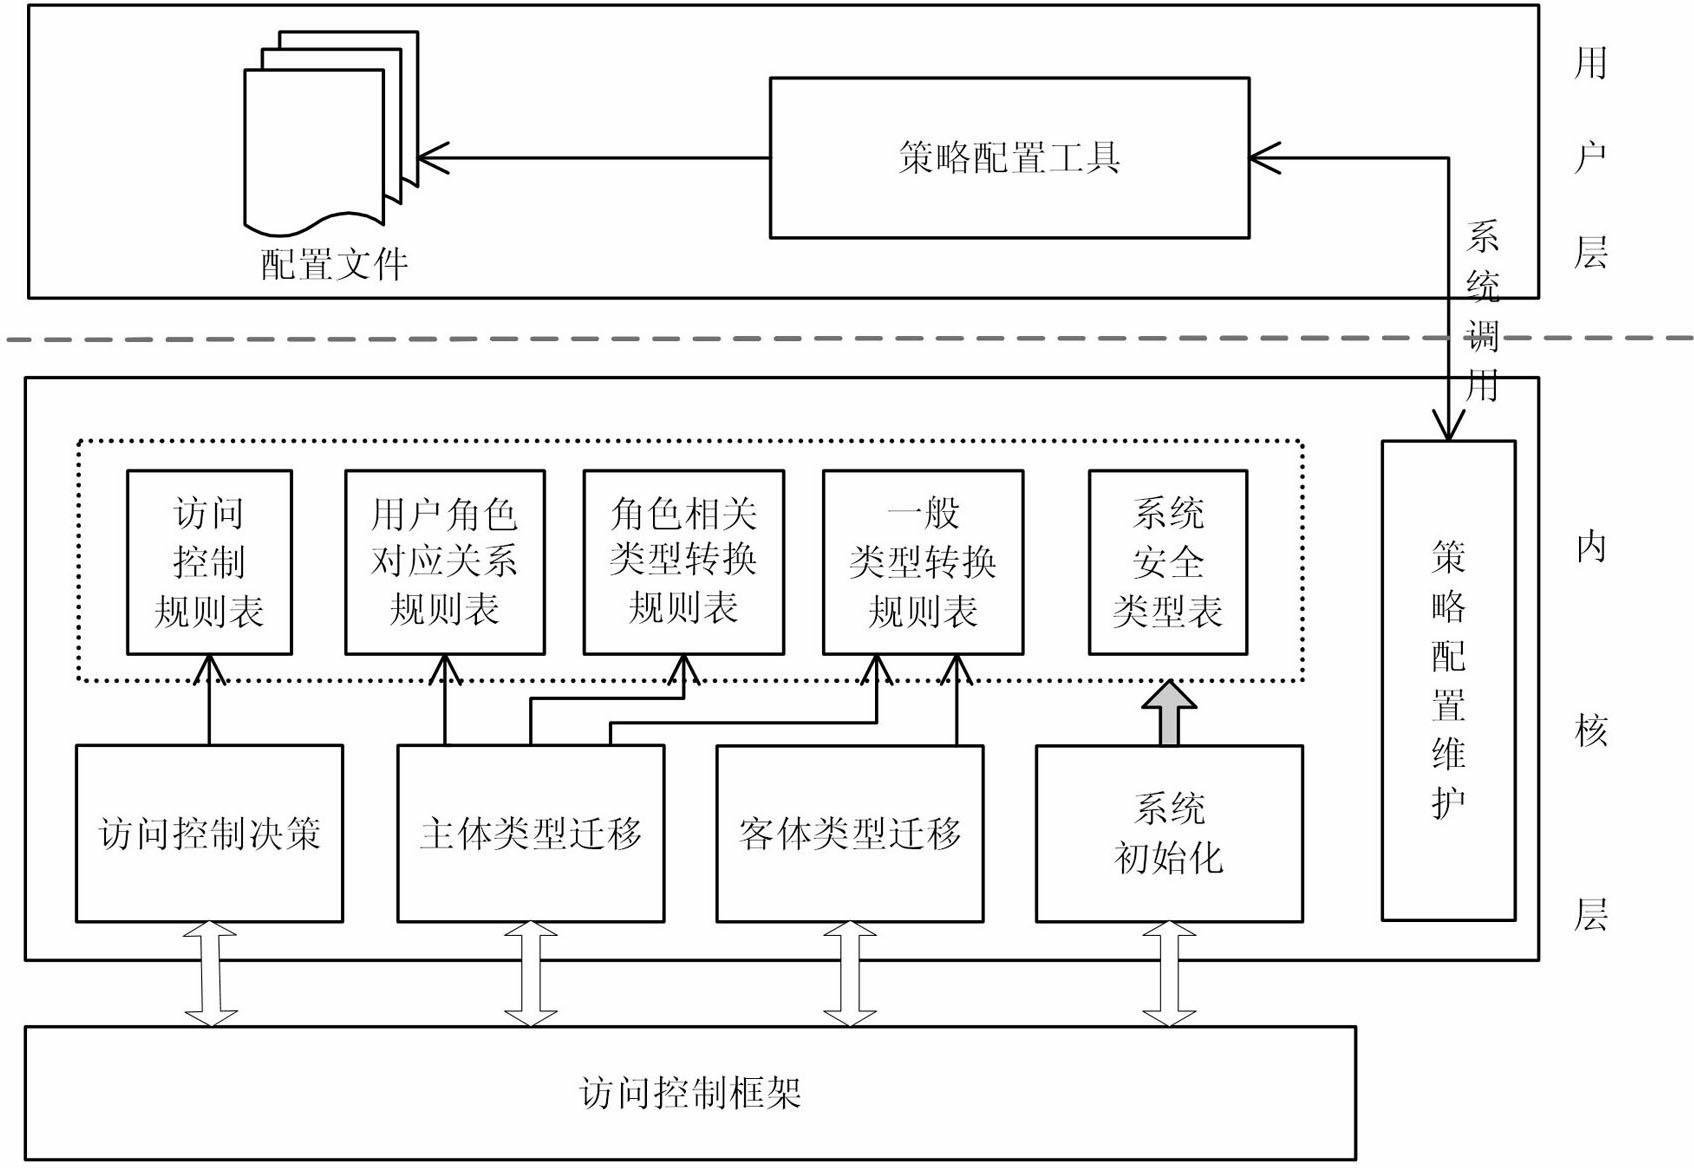 Loose coupling role authorized-type implementation access control method and system thereof